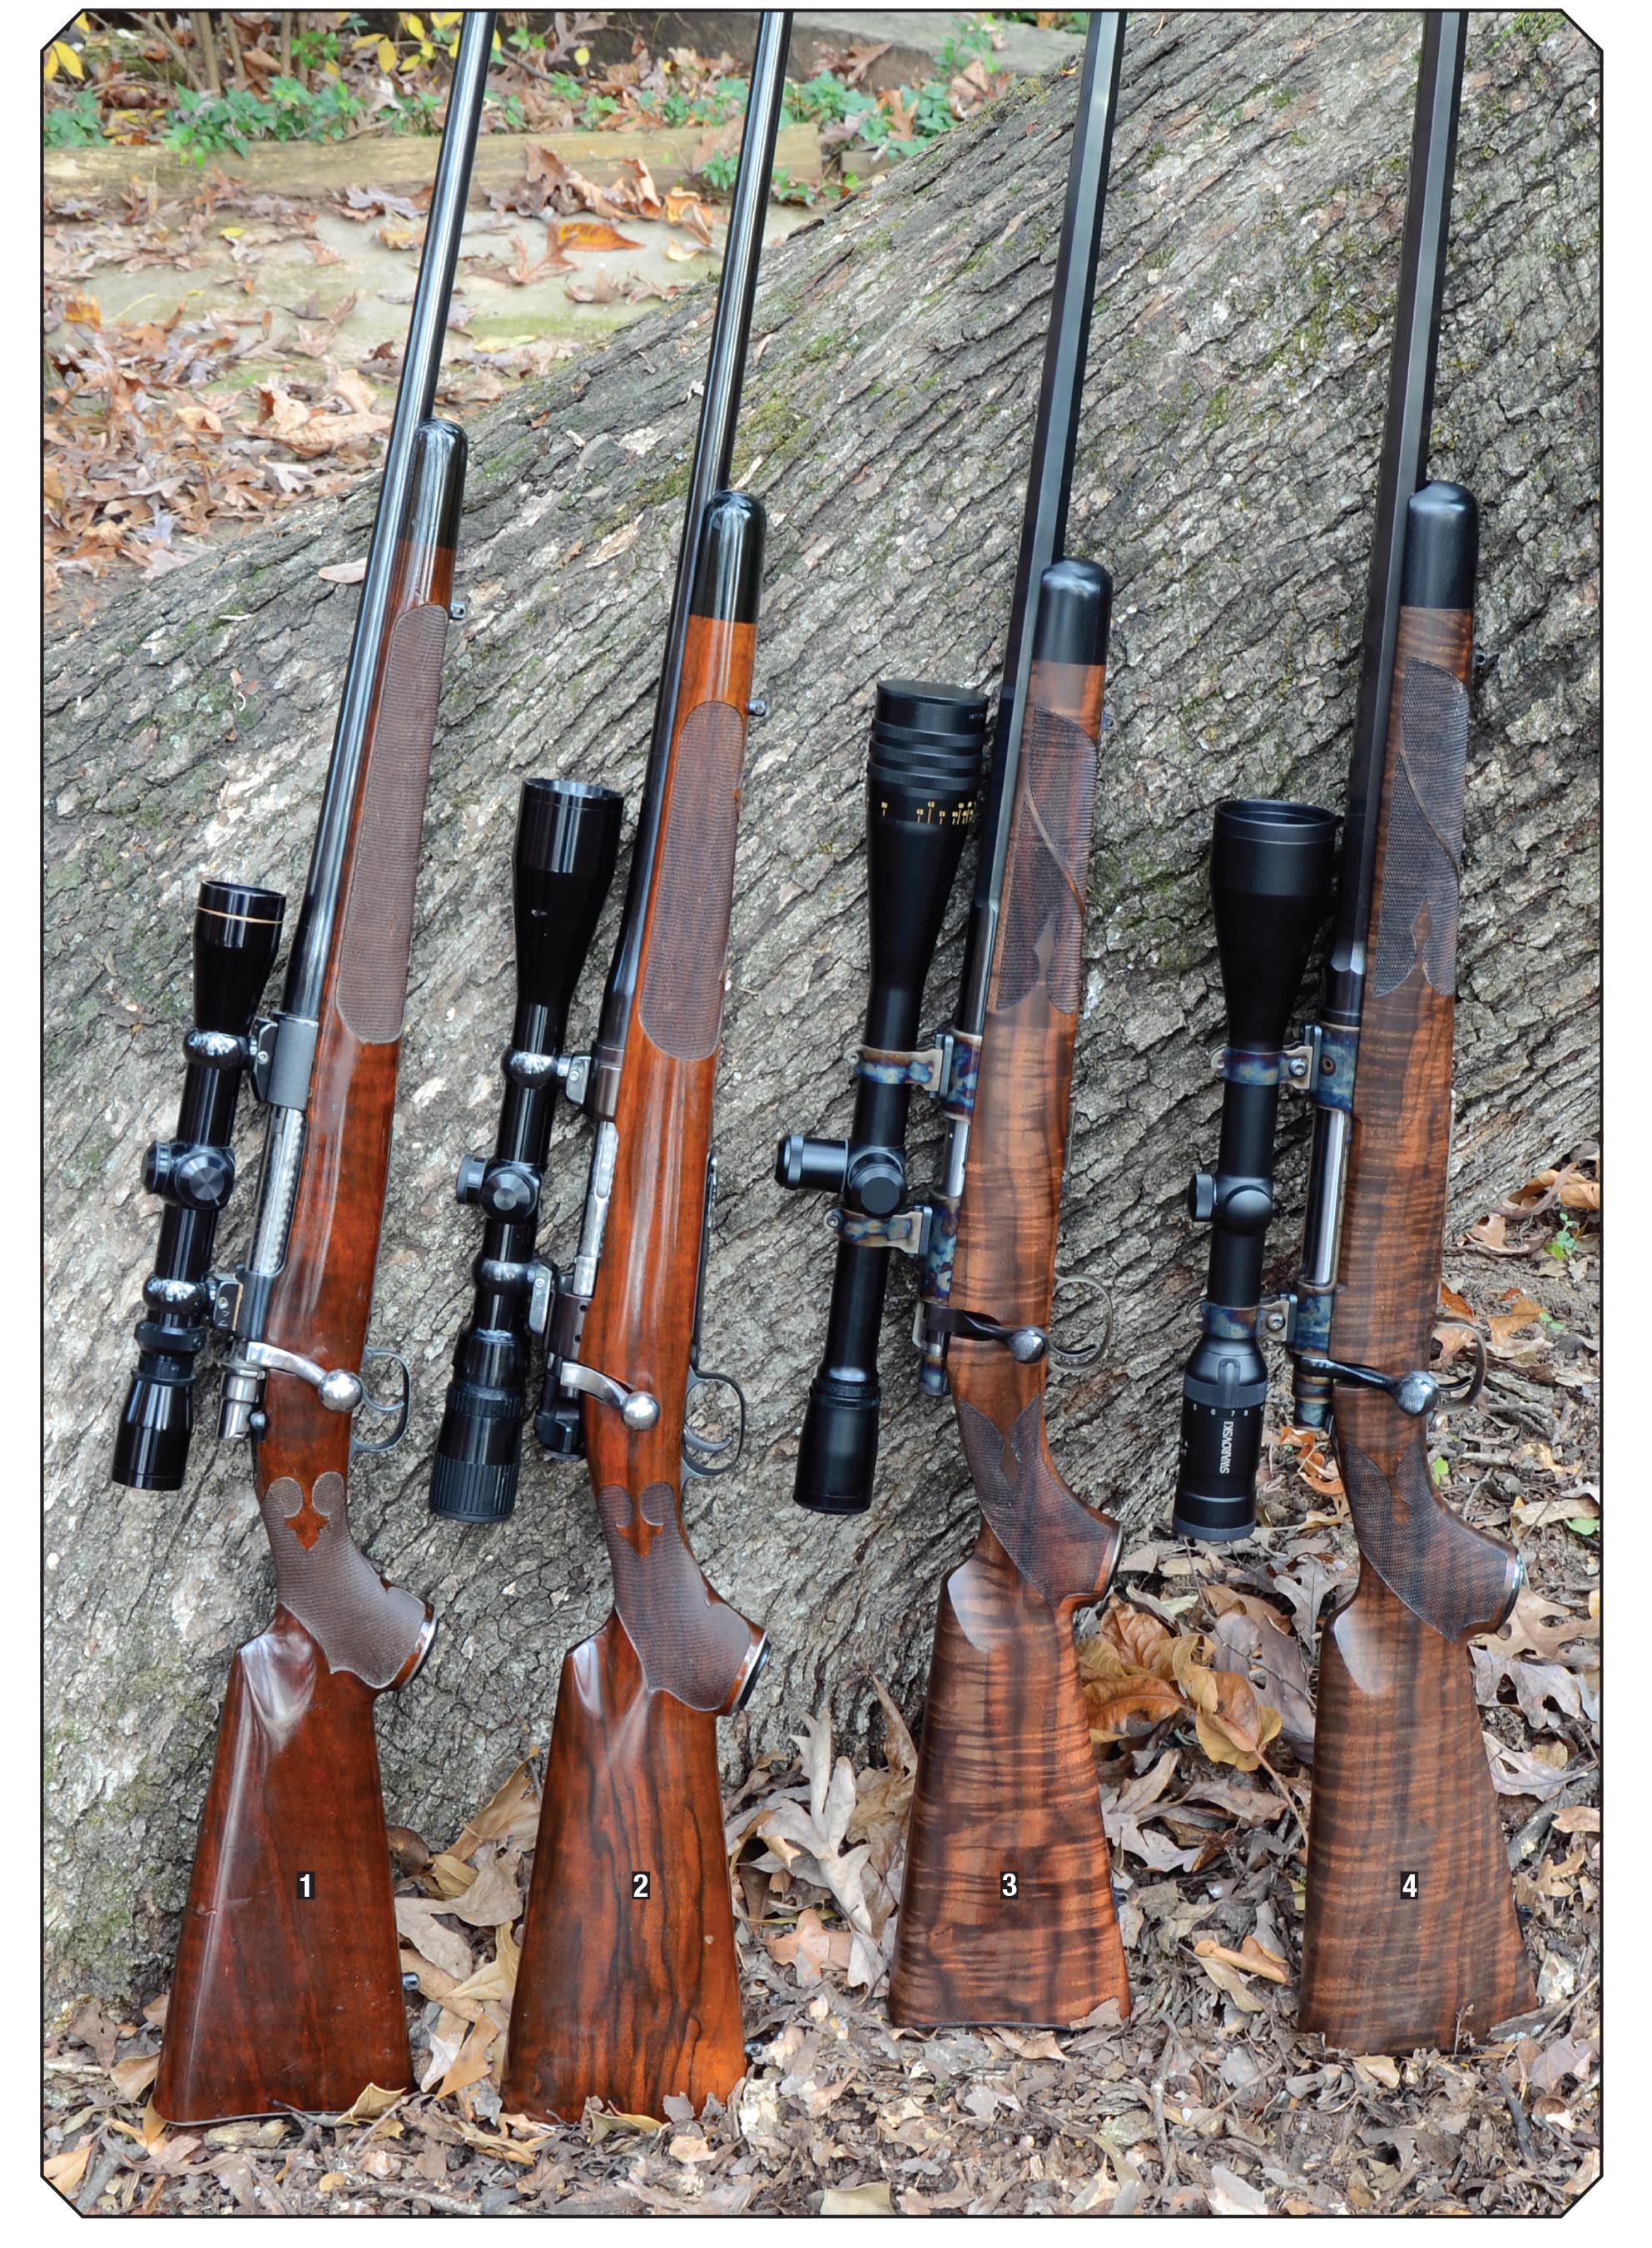 Layne’s rifles include a (1) Talley custom ’98 Mauser .280 Remington (formerly .25-06), (2) Talley custom 1911 Springfield .22 LR, (3) Cooper Model 57M Western Classic .22 LR and a (4) Cooper Model 52 .25-06.